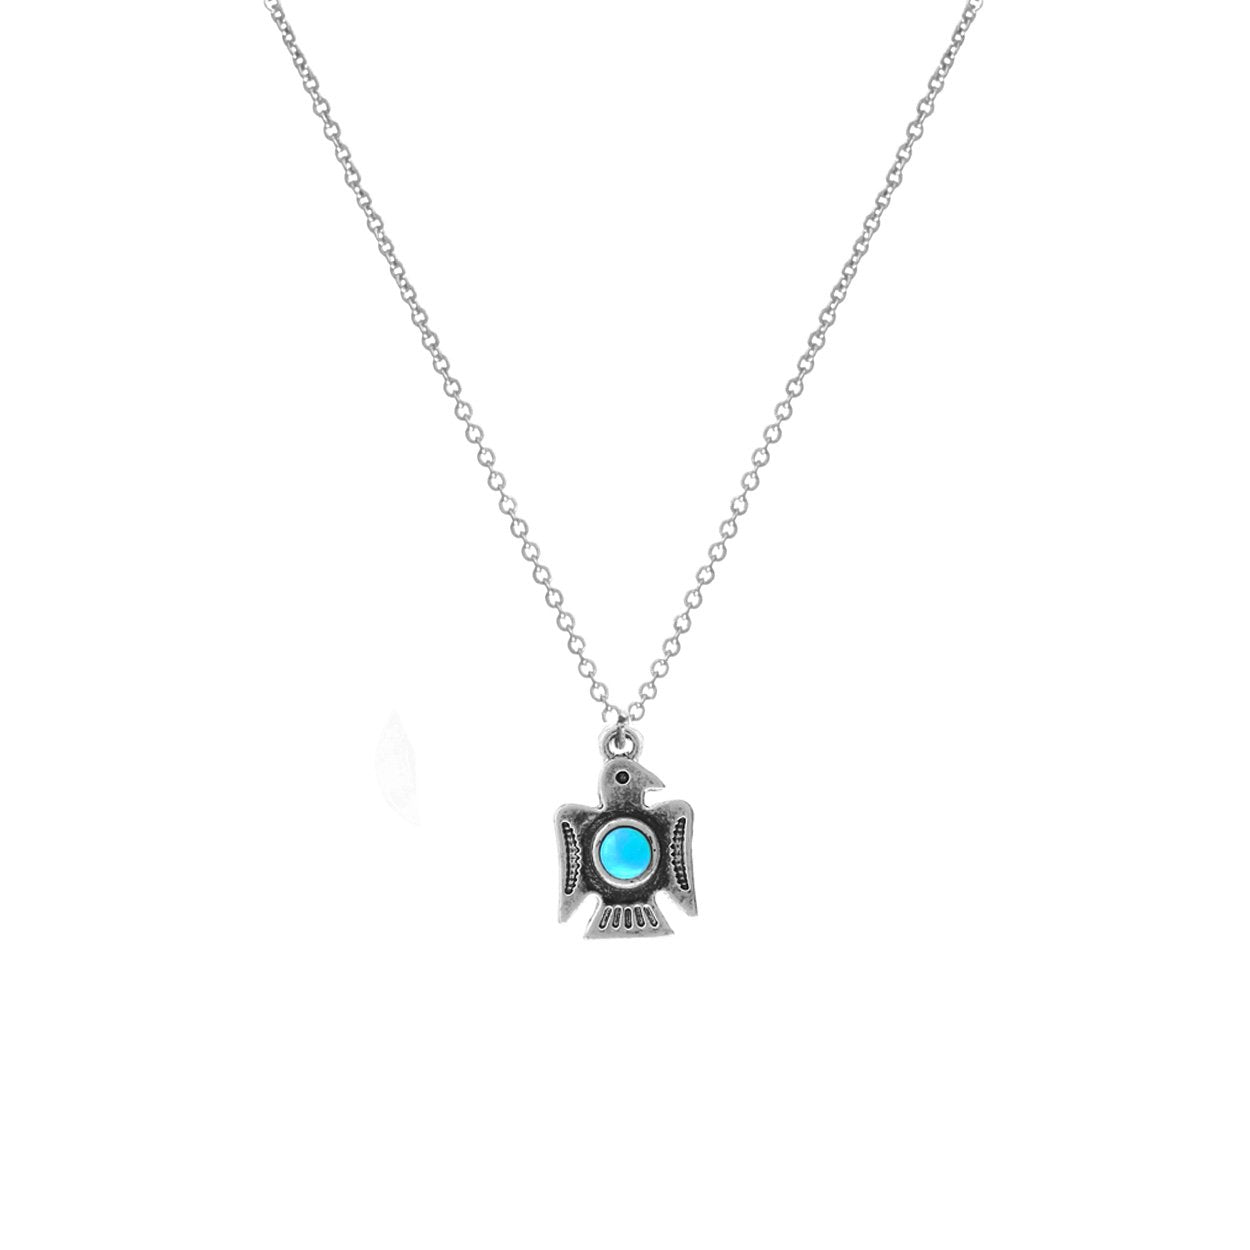 Western Style Aztec Thunderbird Turquoise Howlite Pendant Necklace, 6"-19" with 3" Extender (Burnished Silver Tone)